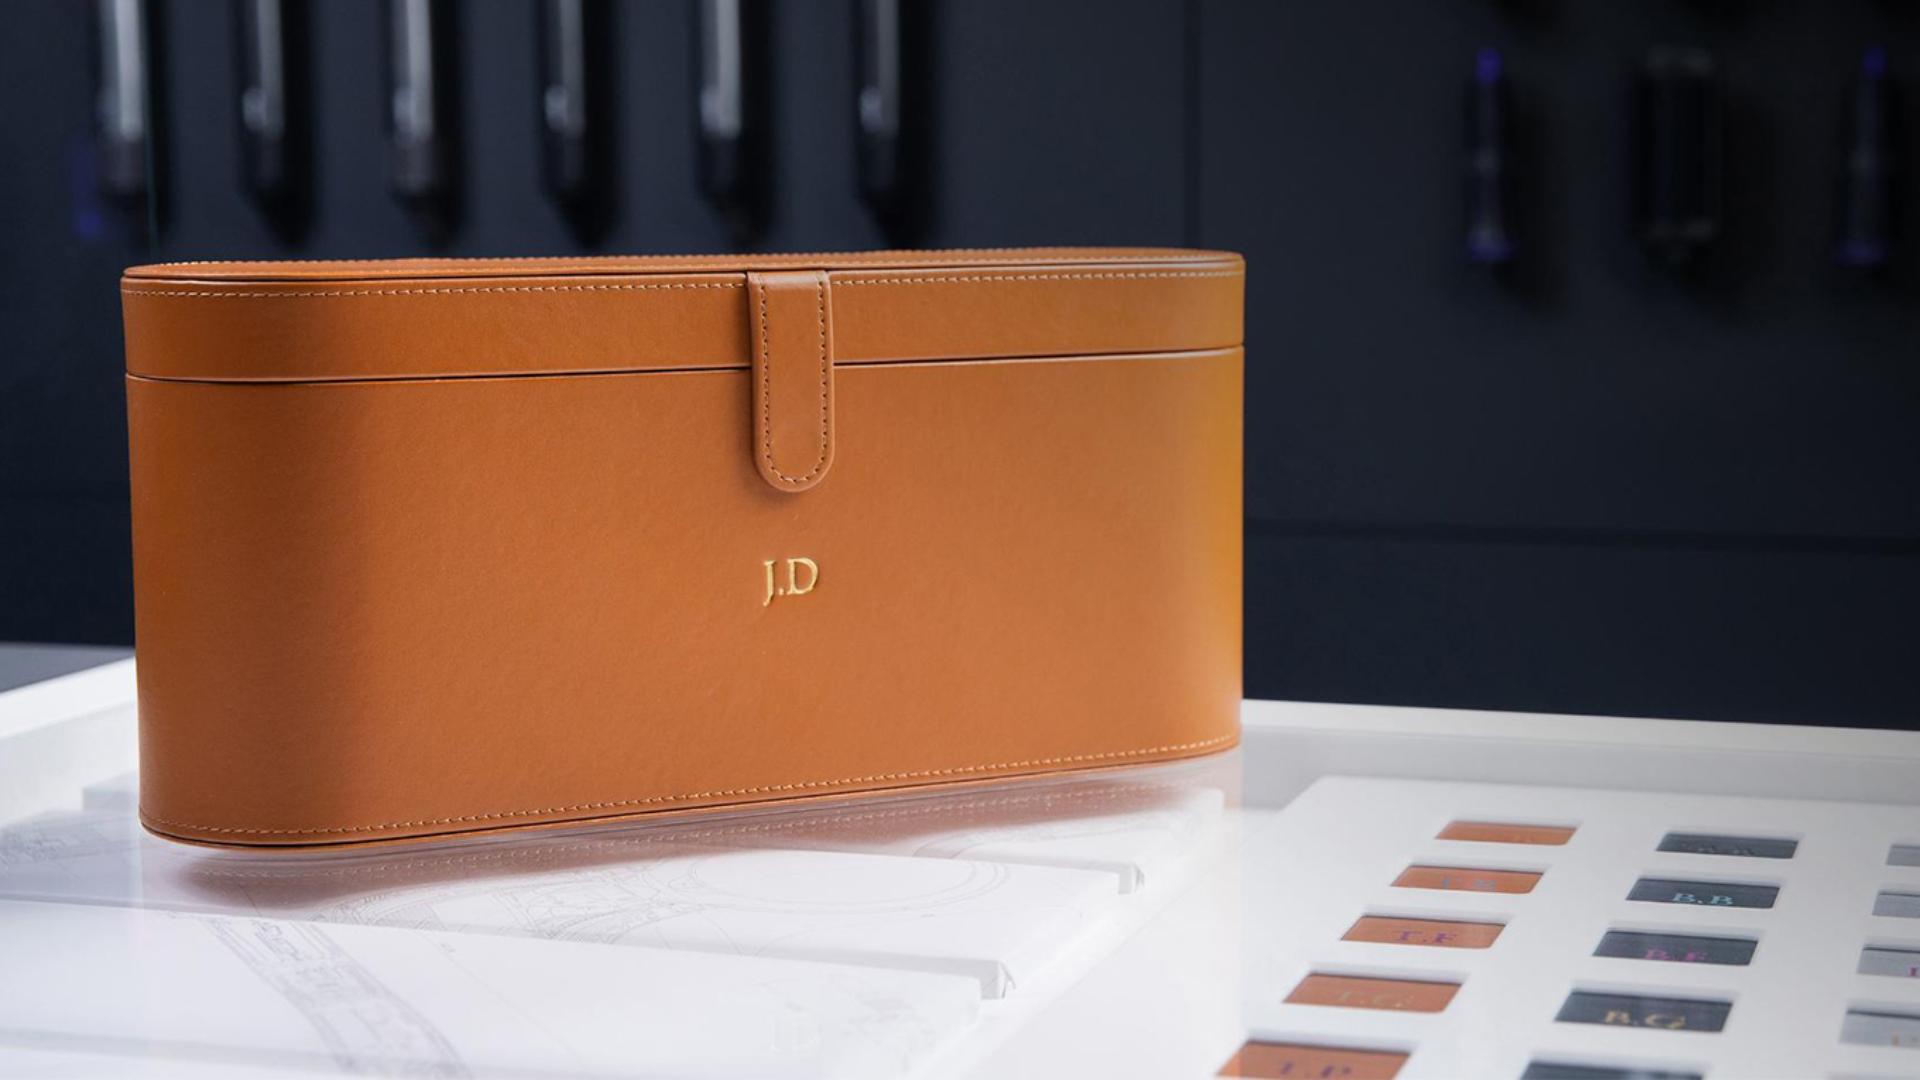 Presentation case with someone's initials